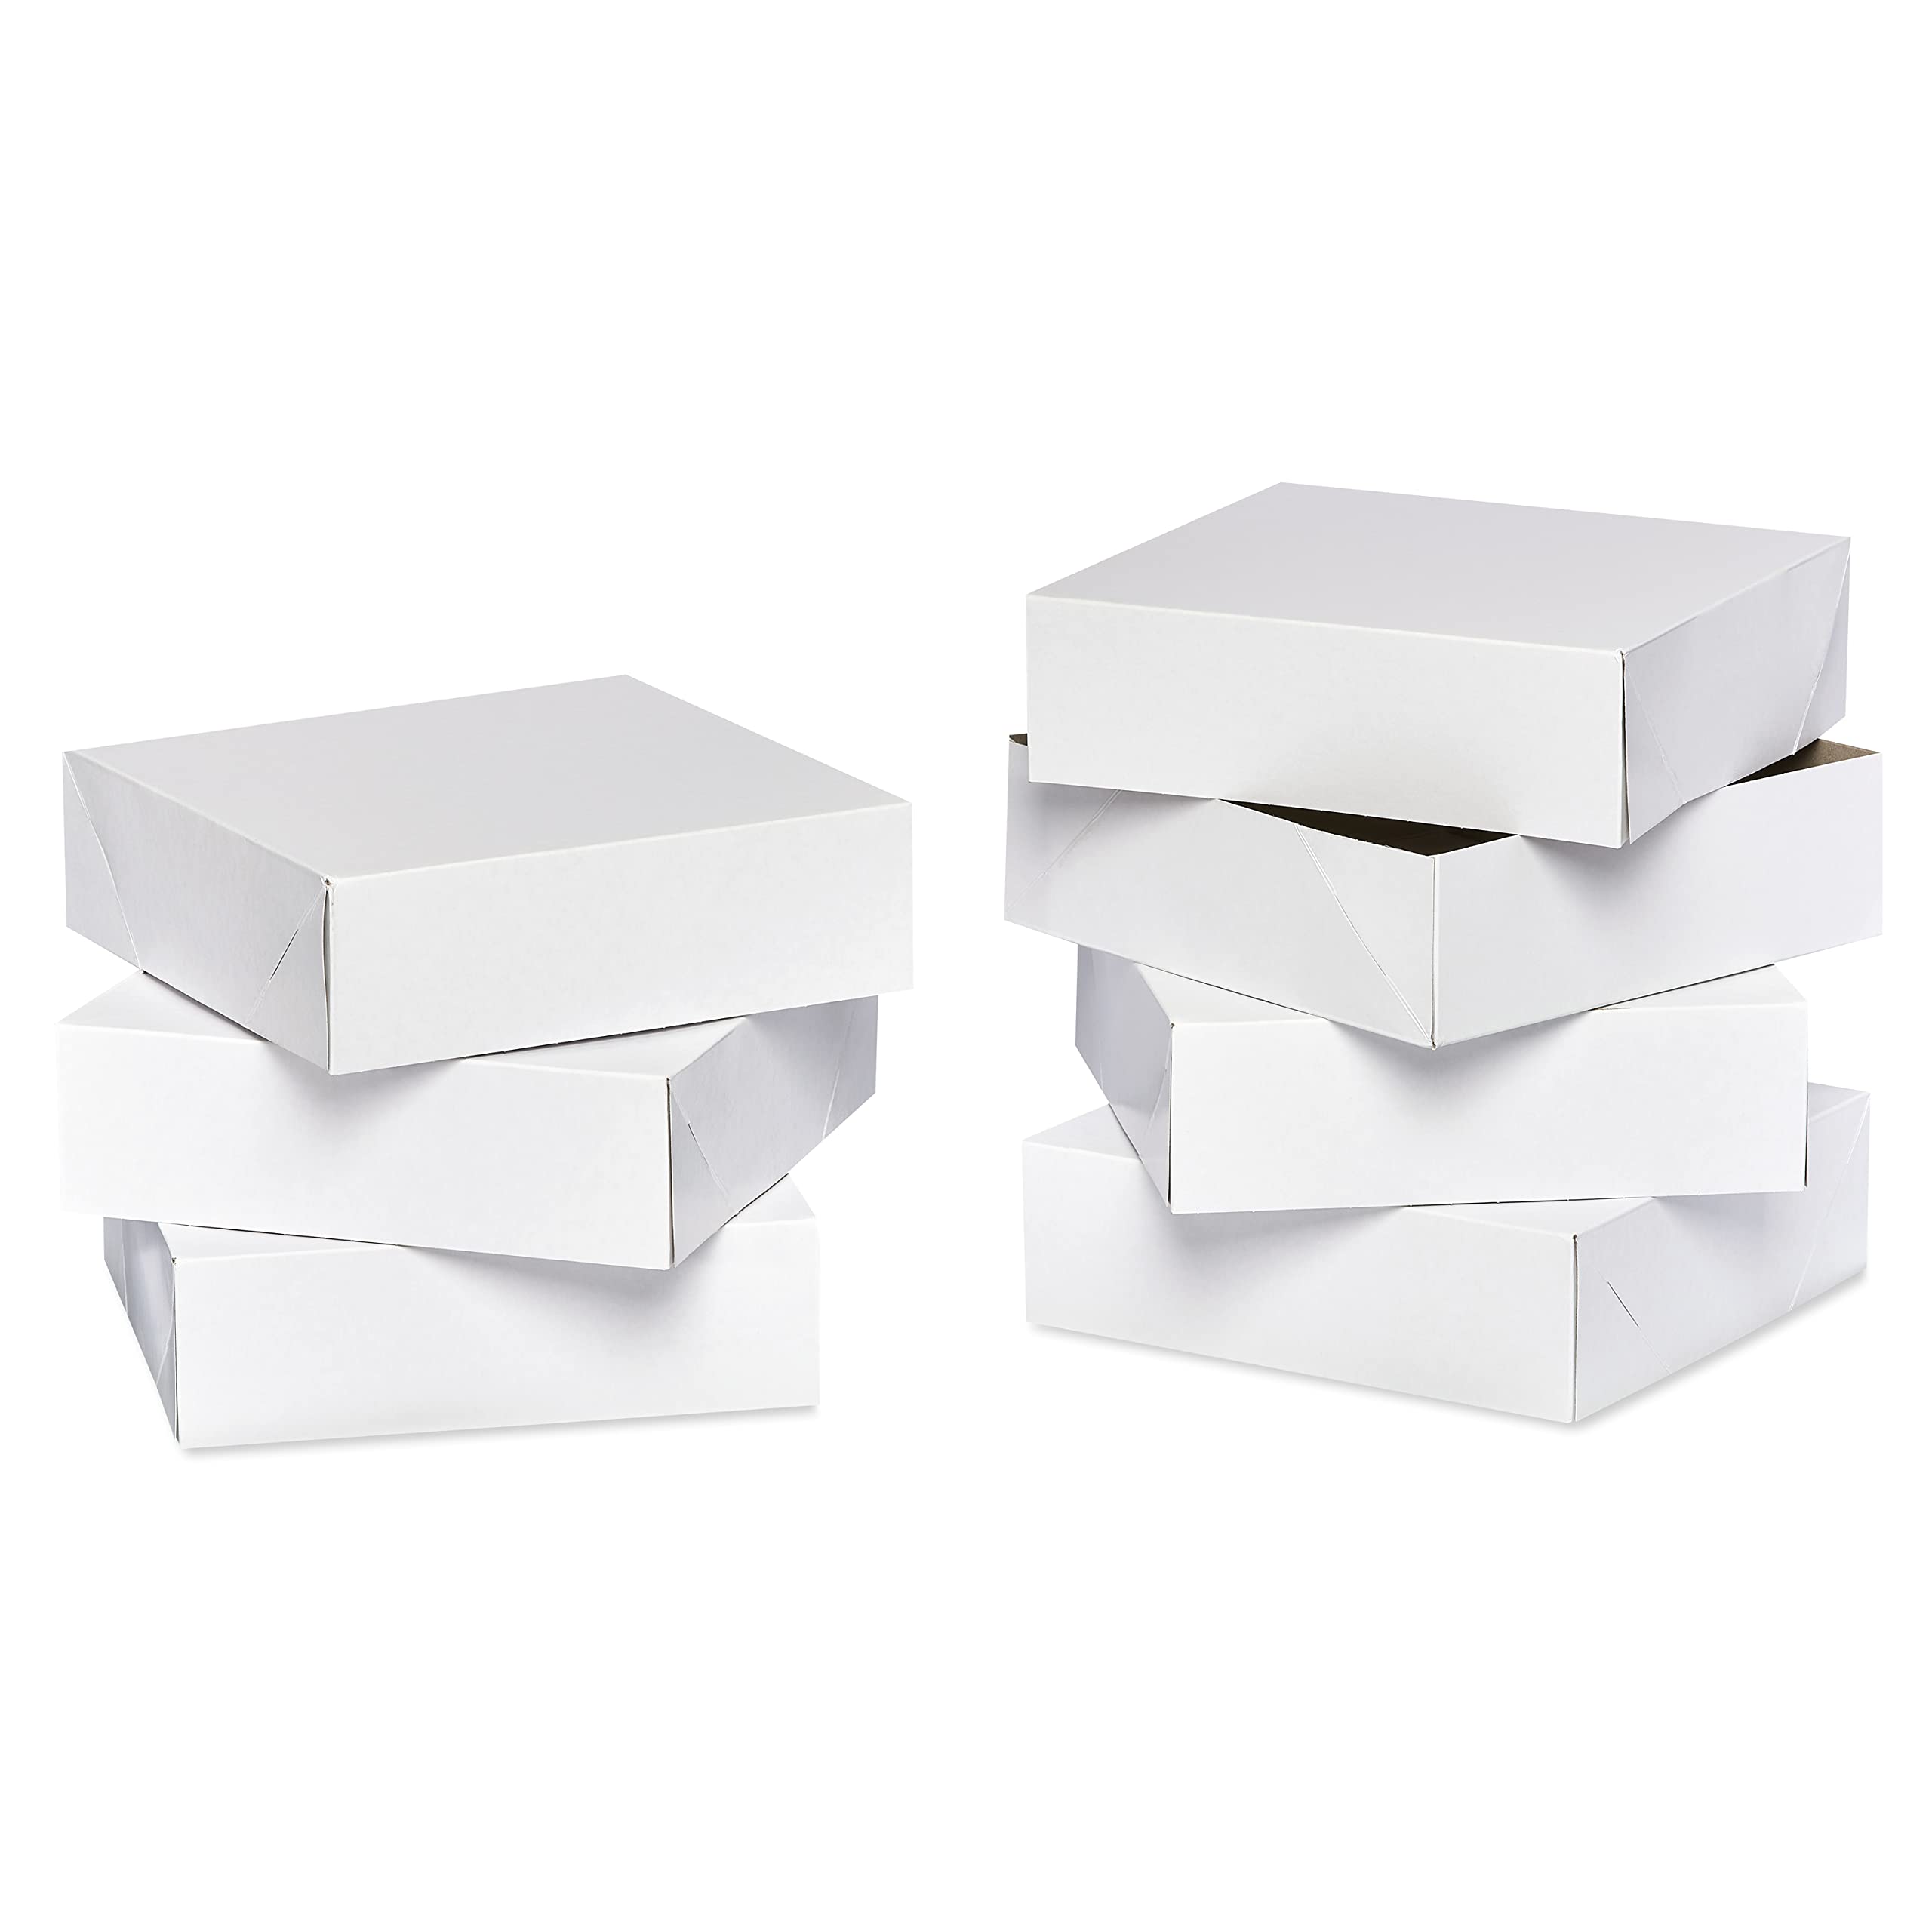 American Greetings Square White Gift Boxes with Lids for Birthdays, Graduation and All Occasions, (6-Boxes, 9'' x 9'')